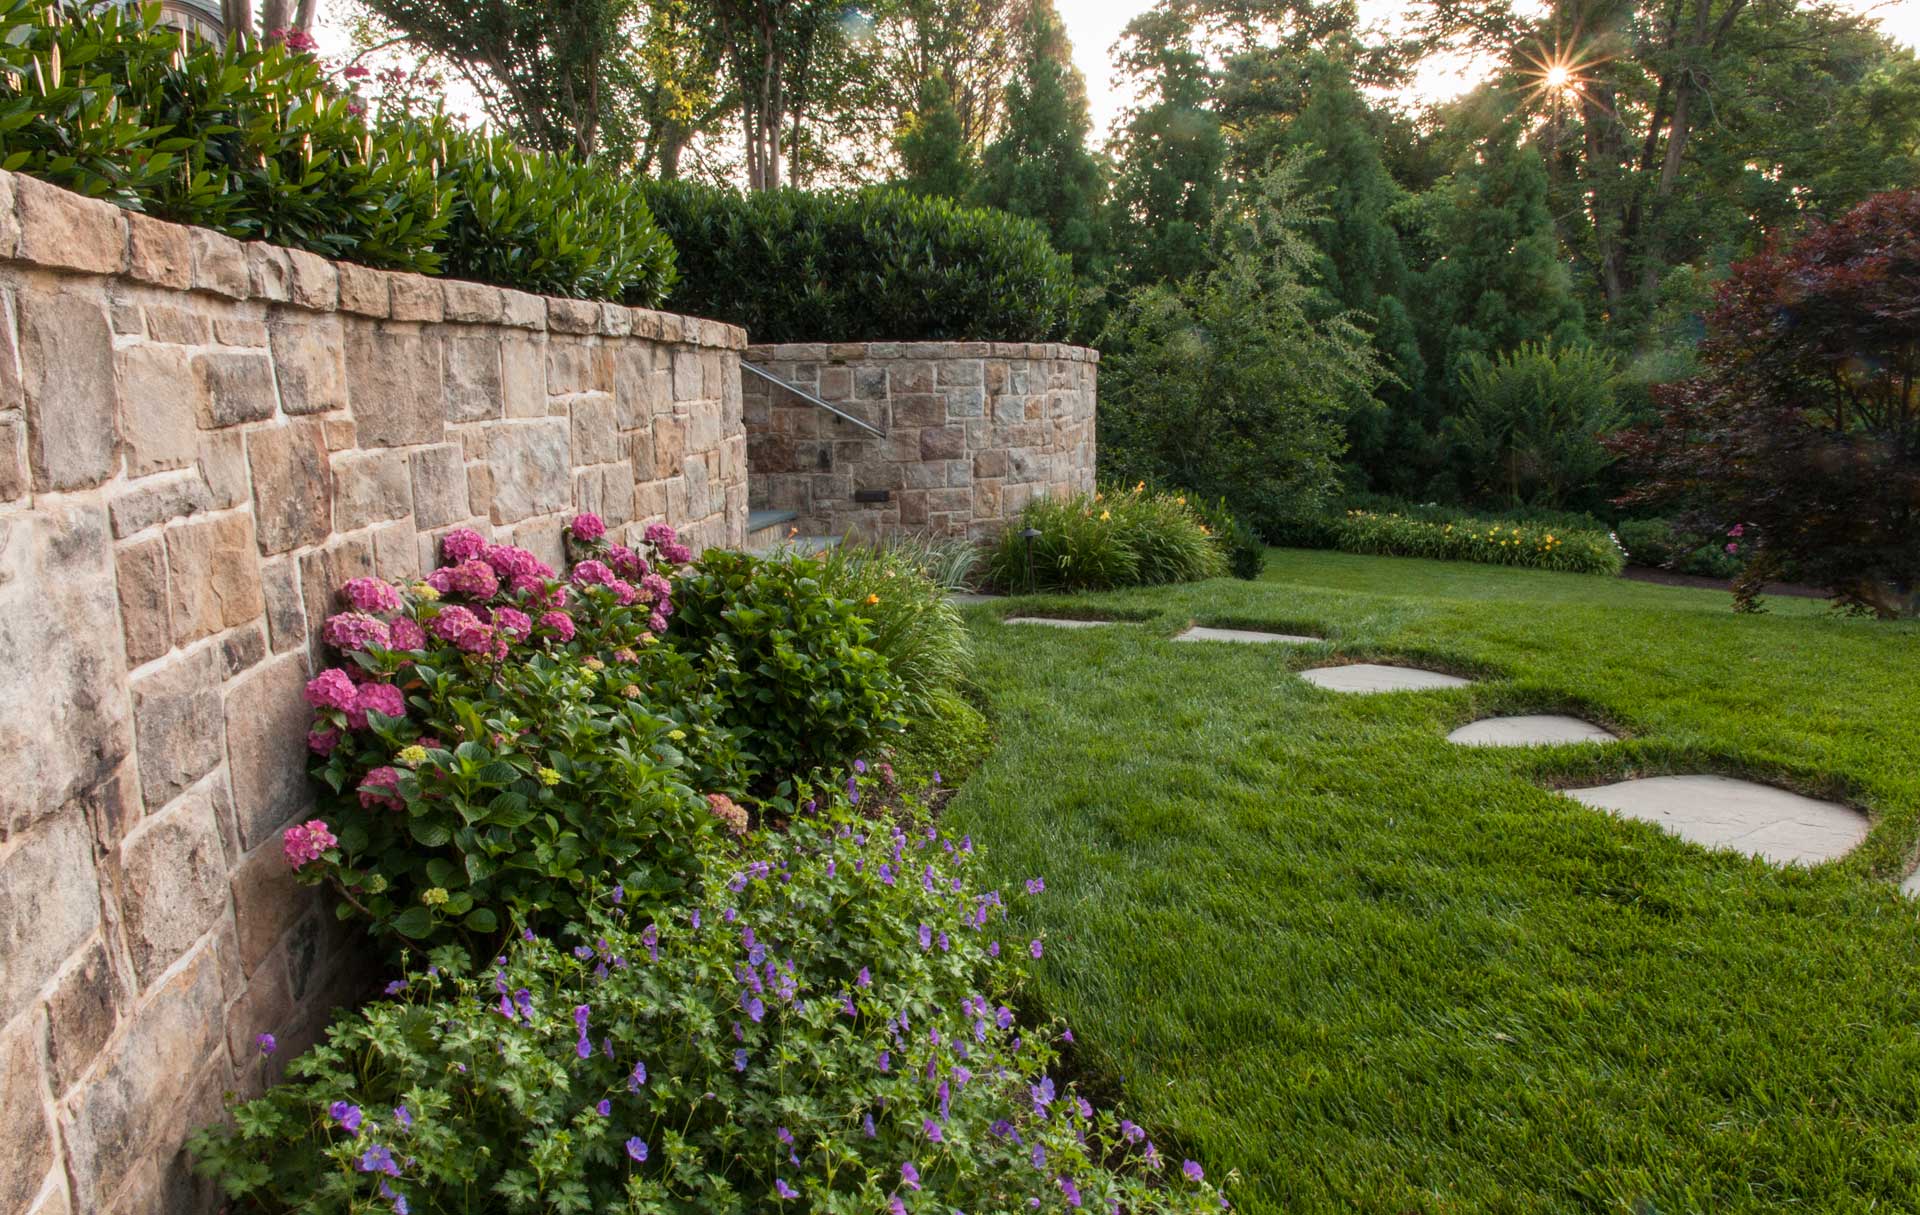 Stone wall and steps and flower beds in a backyard, creating a serene and charming outdoor space.